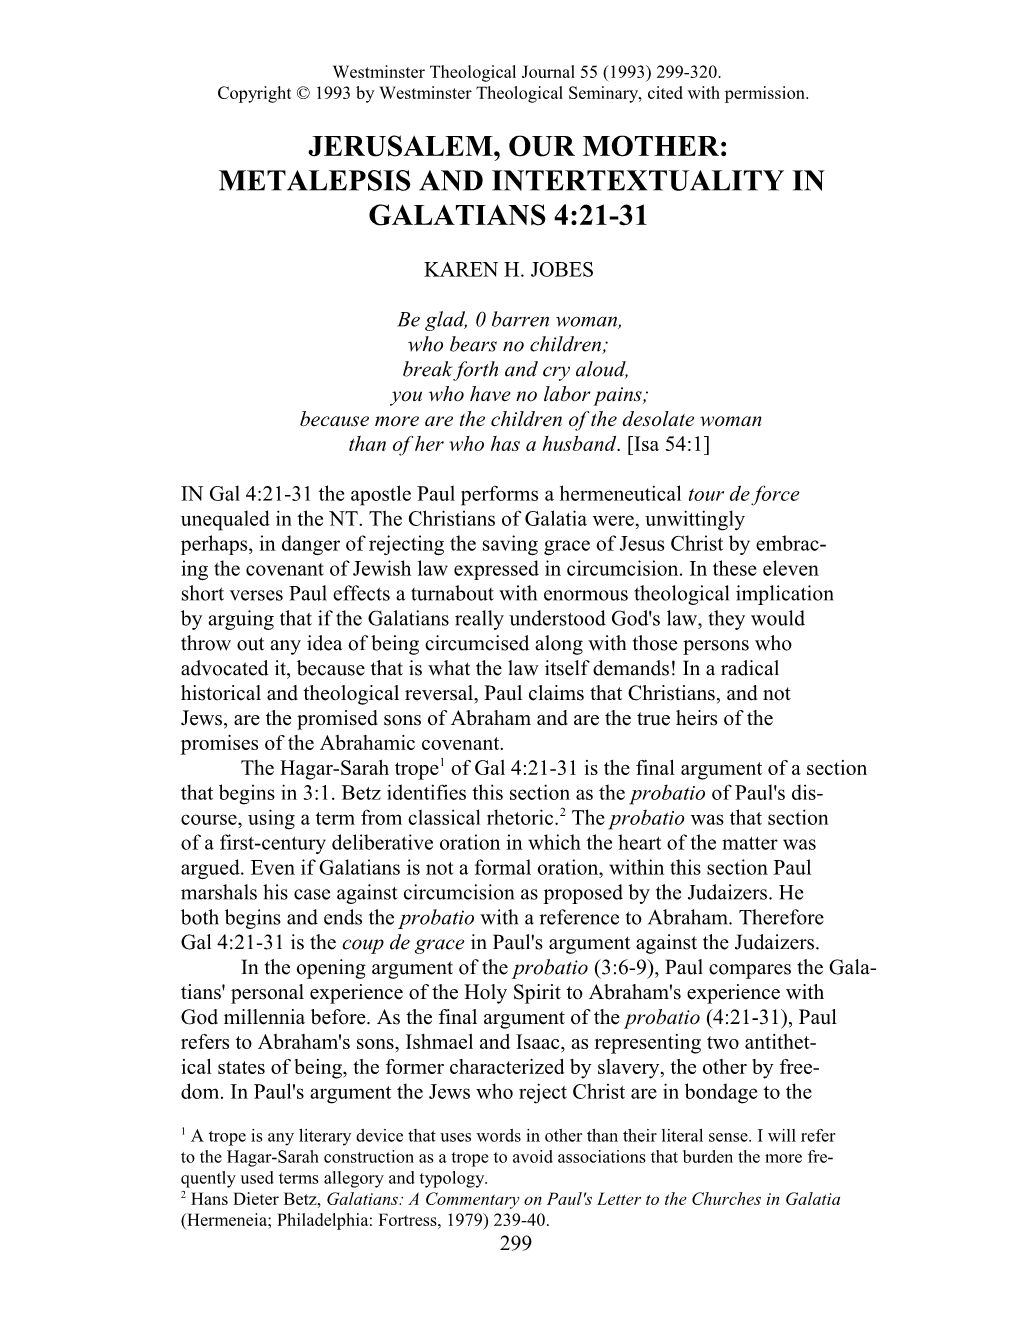 Jerusalem, Our Mother: Metalepsis and Intertexuality in Galatians 4:21-31